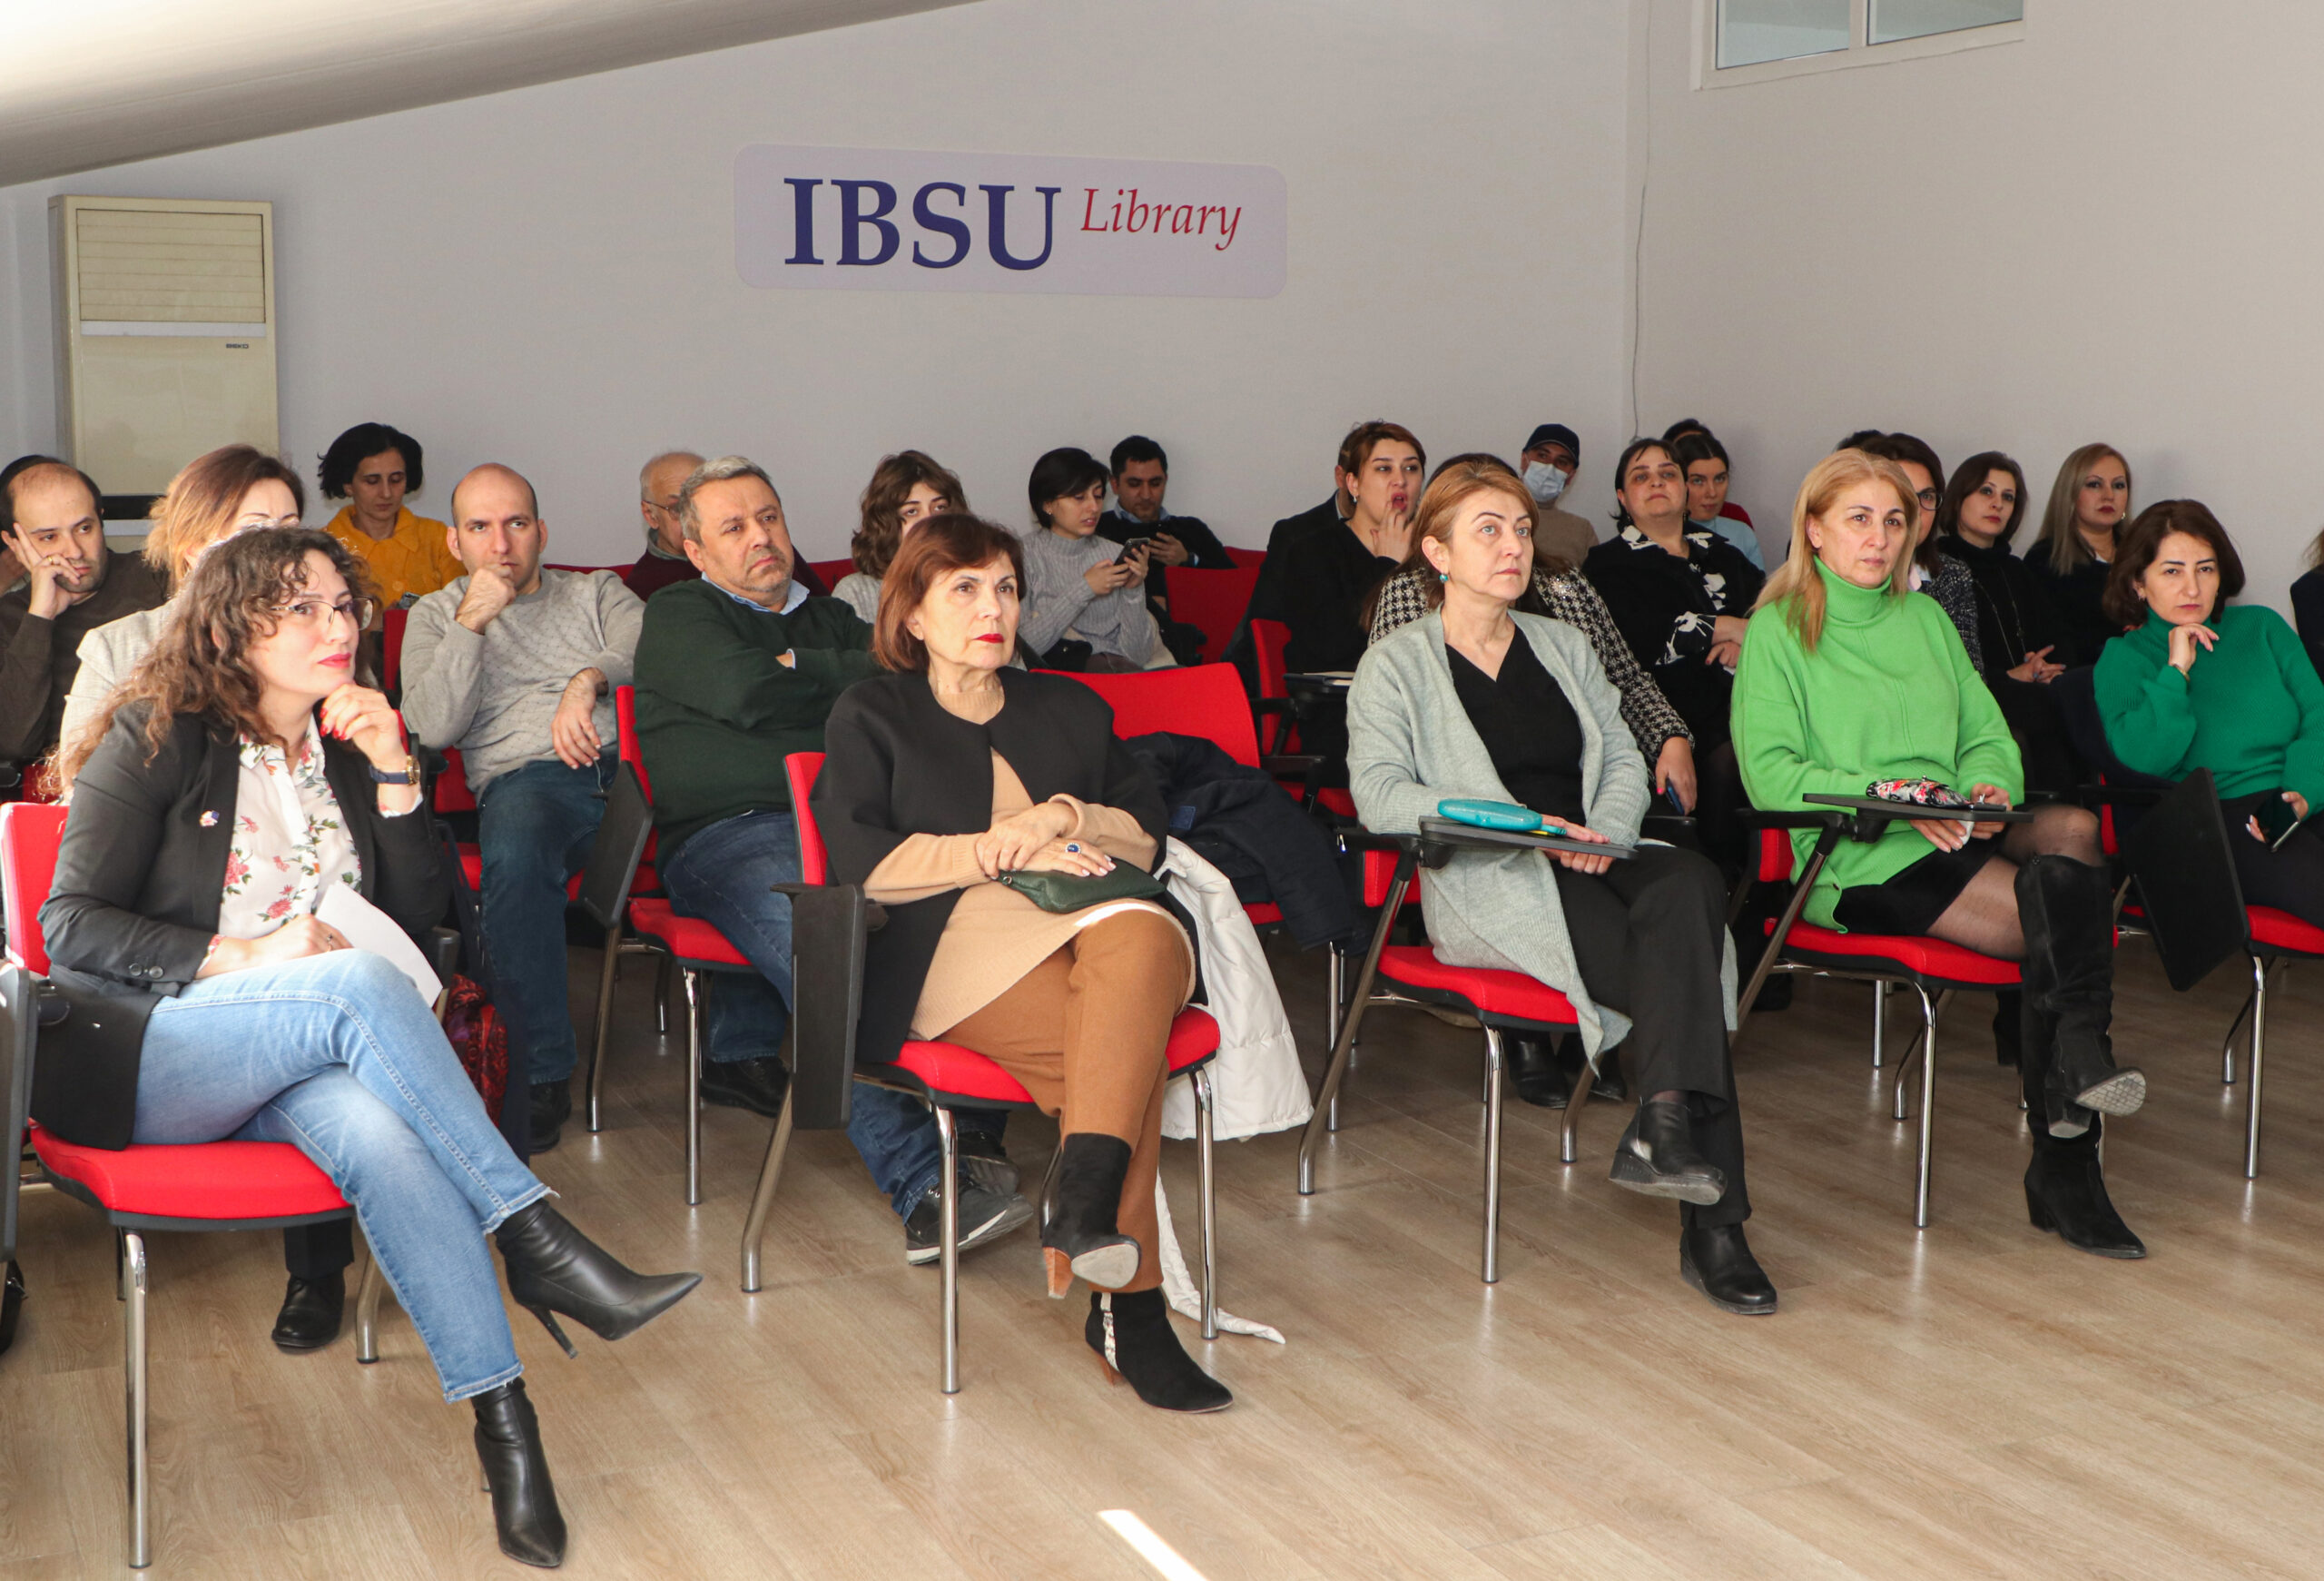 At IBSU the training "Participation in Grant Projects" was held